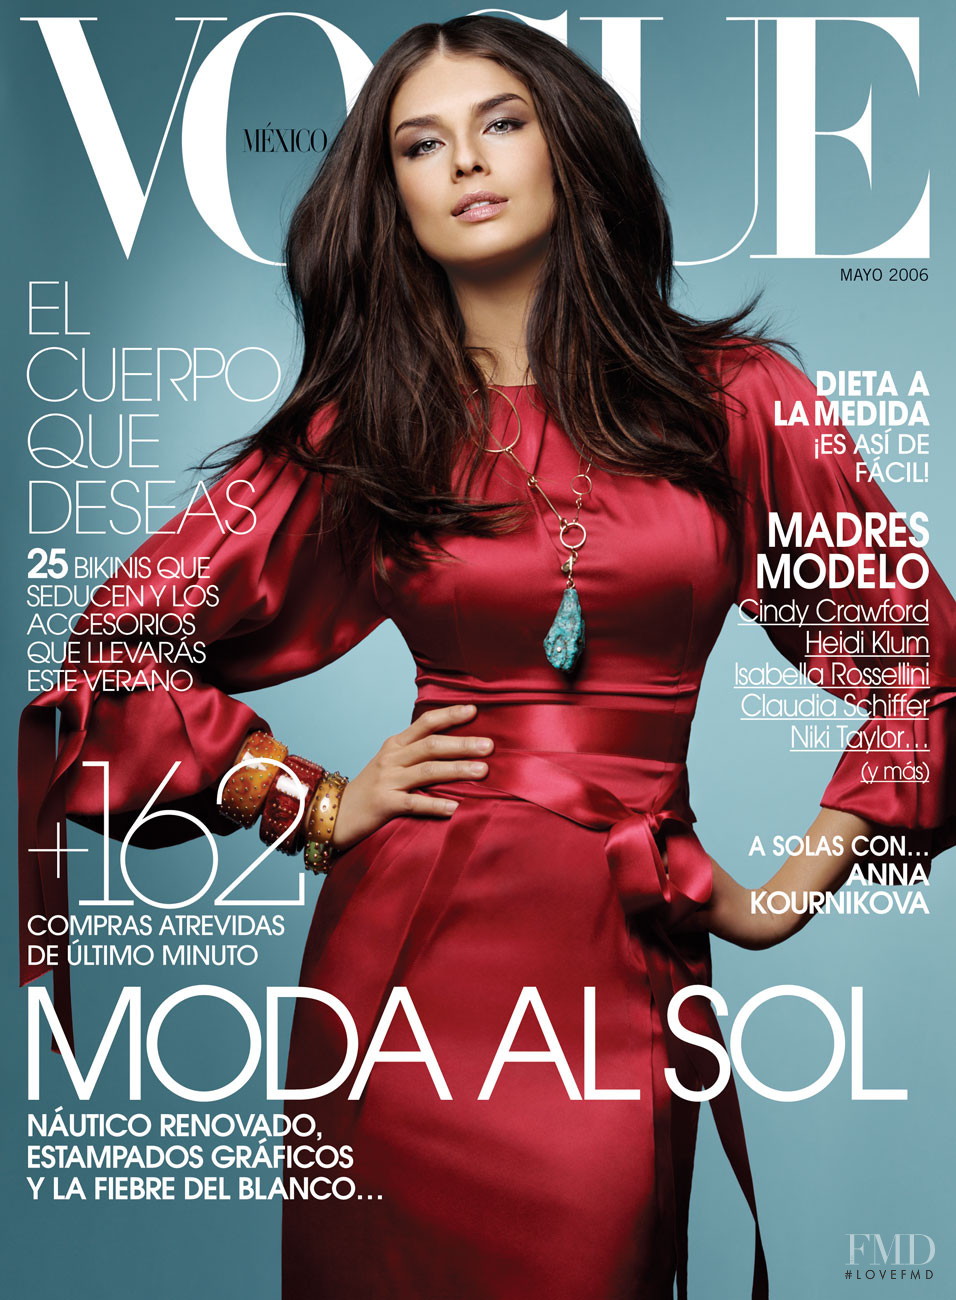 Cover of Vogue Mexico with Liliana Dominguez, May 2006 (ID:49428 ...